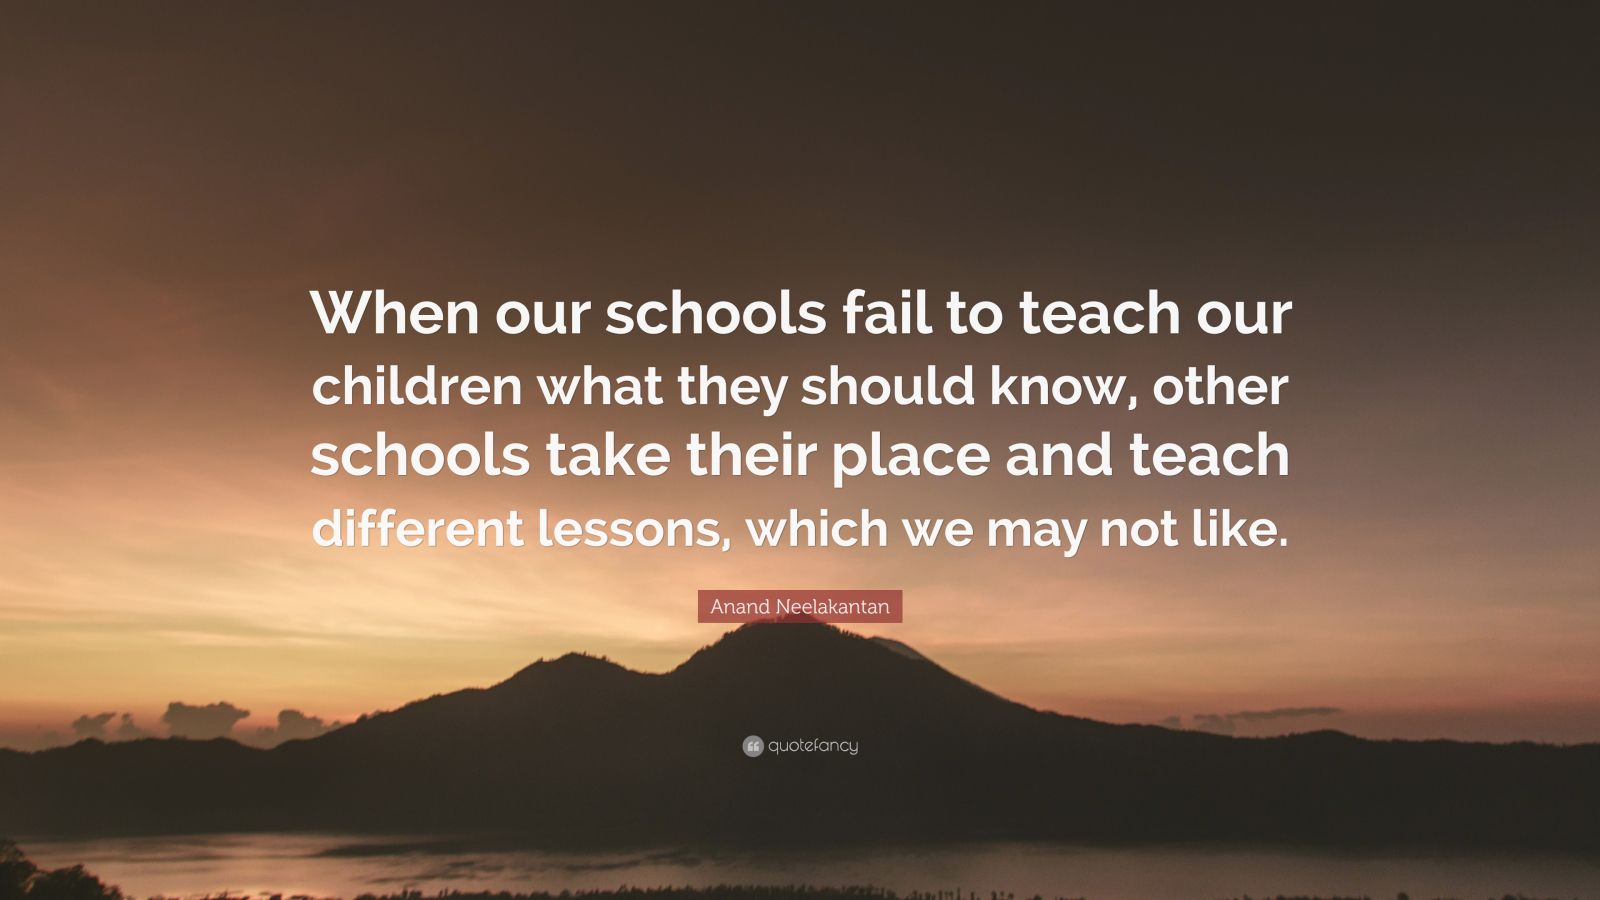 Anand Neelakantan Quote: “When our schools fail to teach our children ...